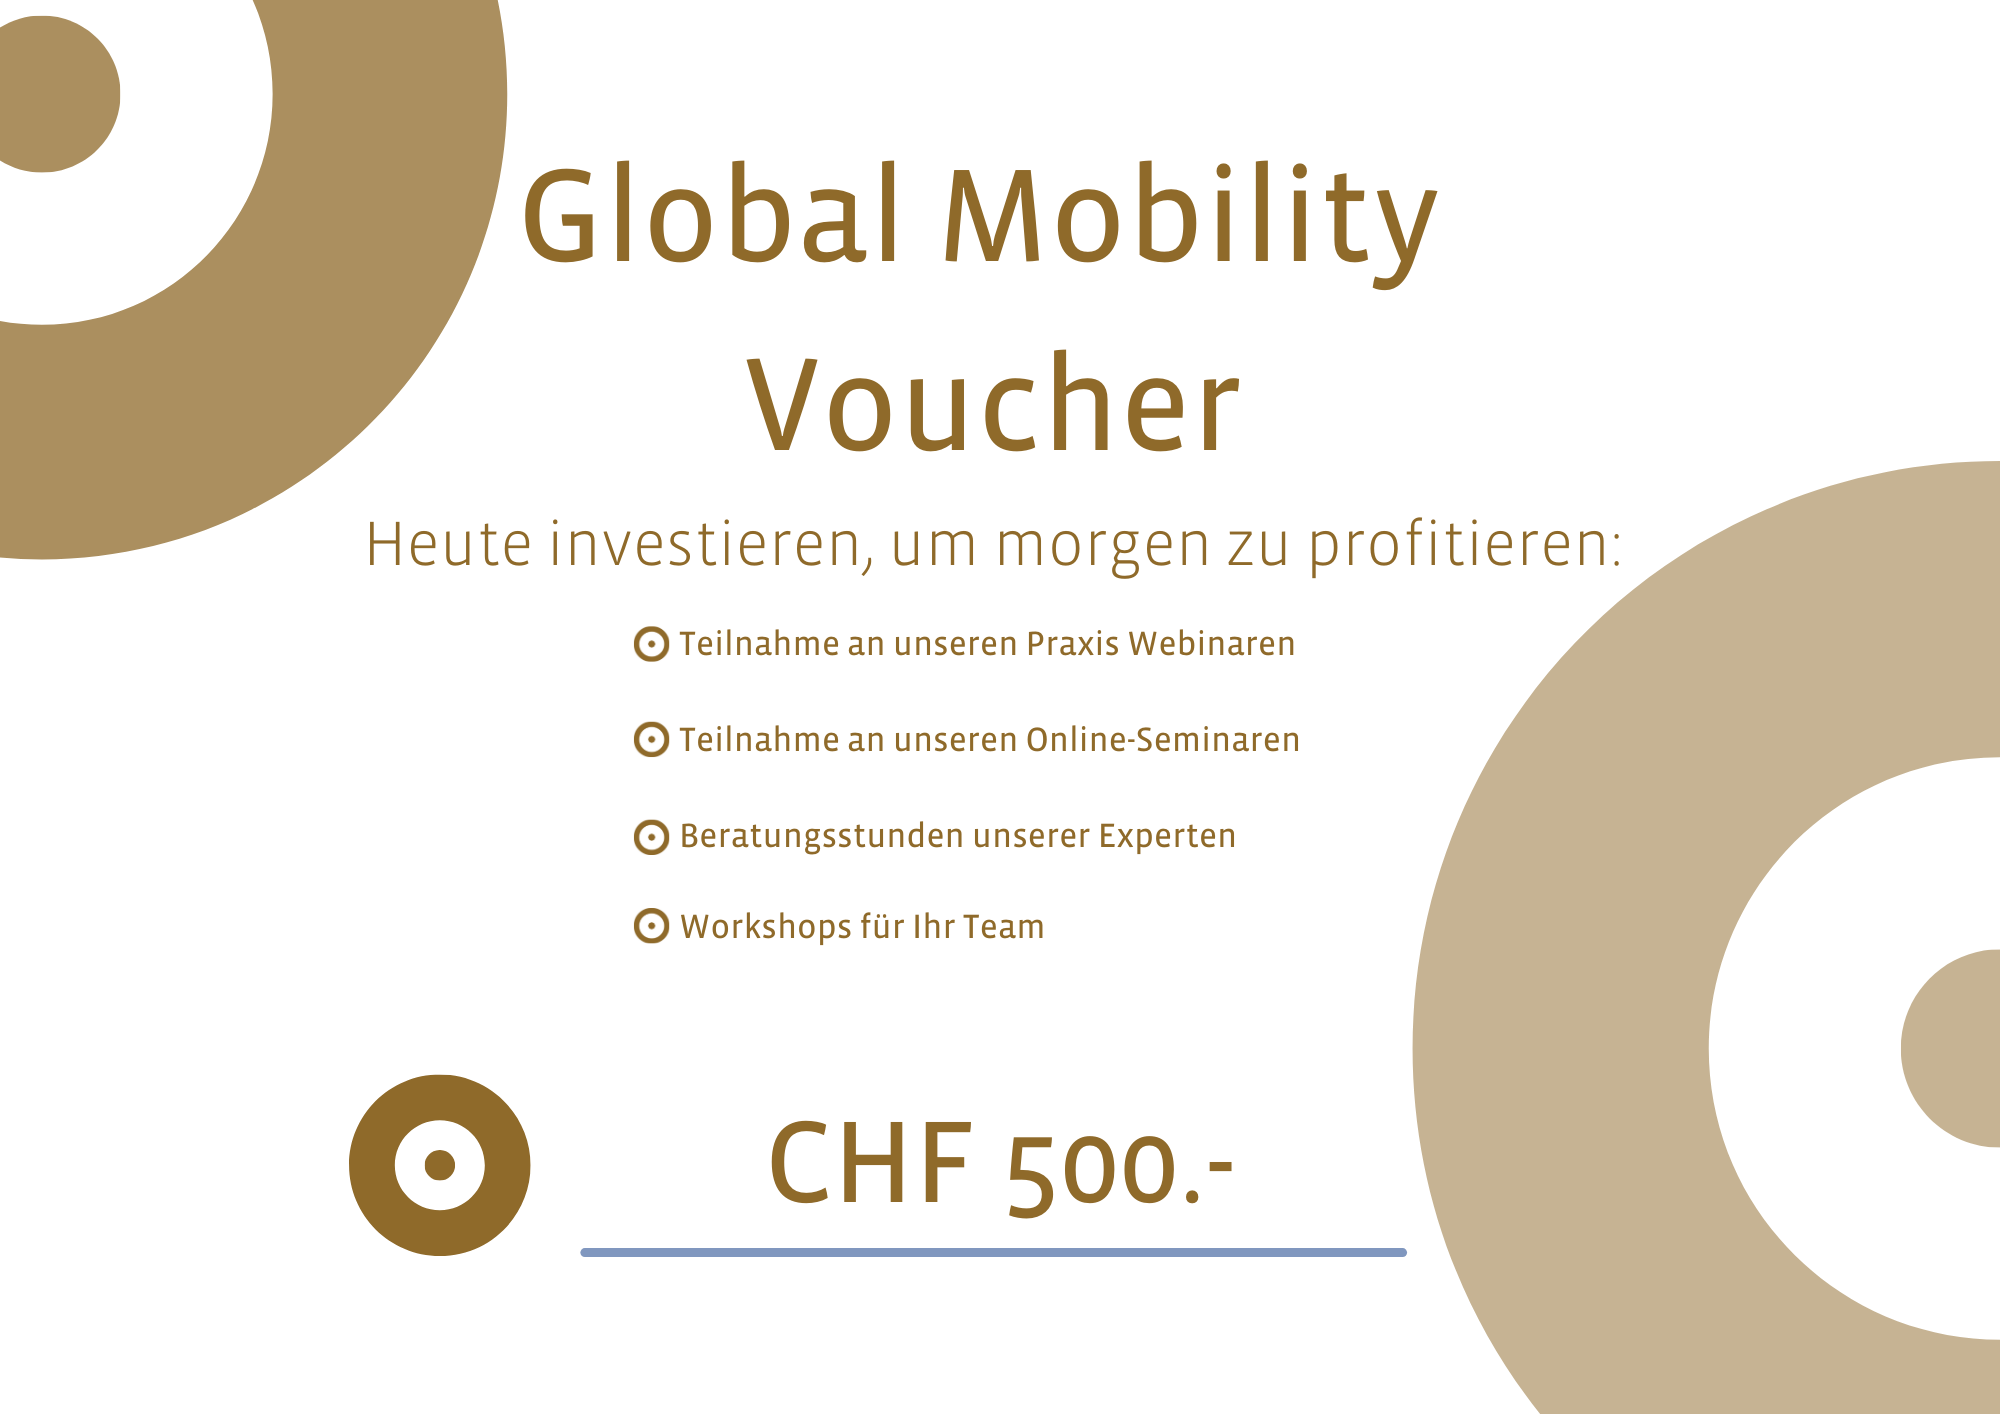 Global Mobility Voucher